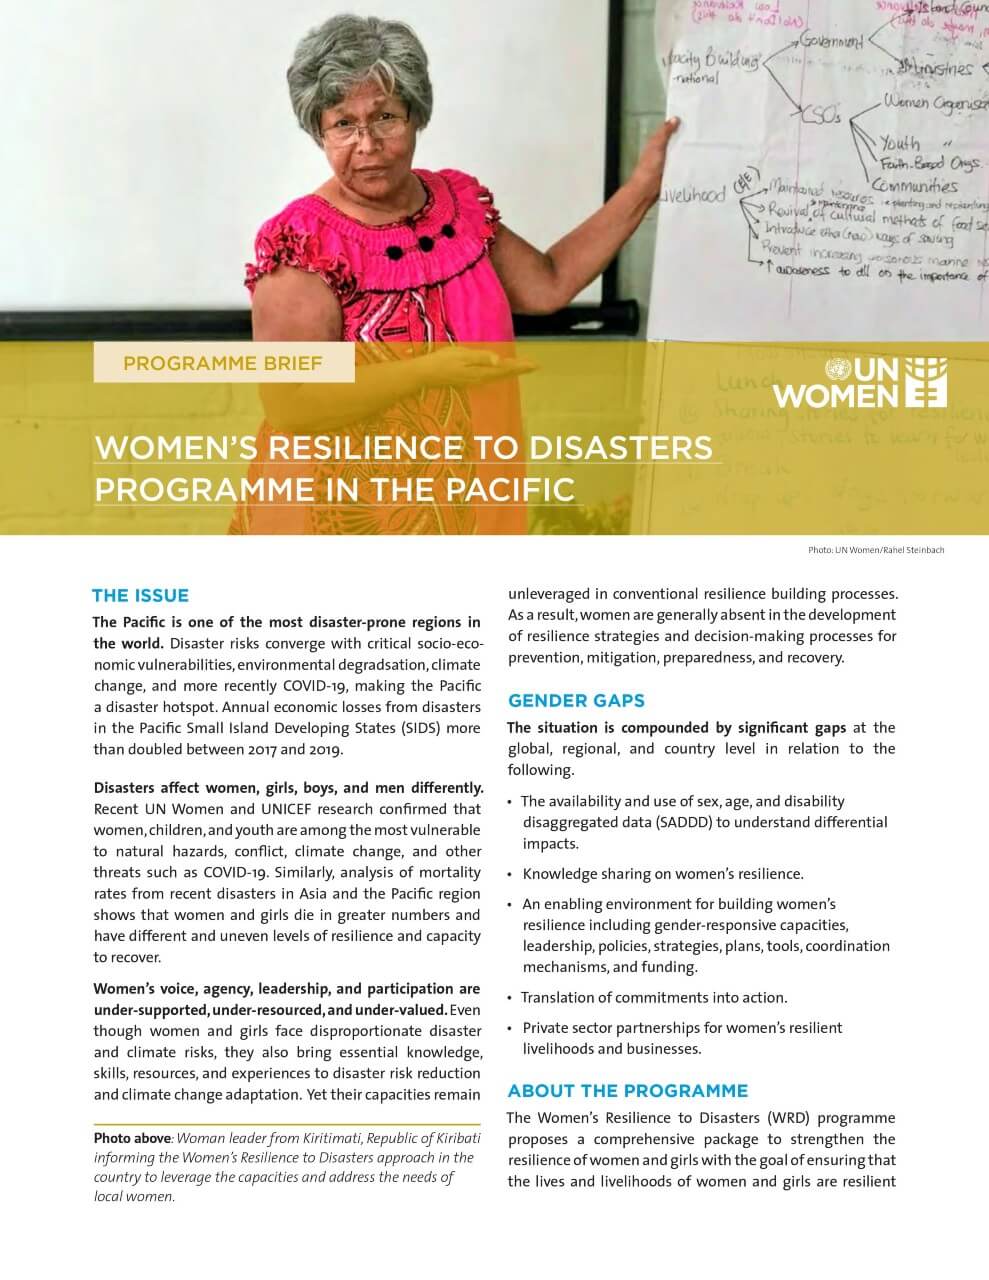 Programme brief: Women’s Resilience to Disasters Programme in the Pacific